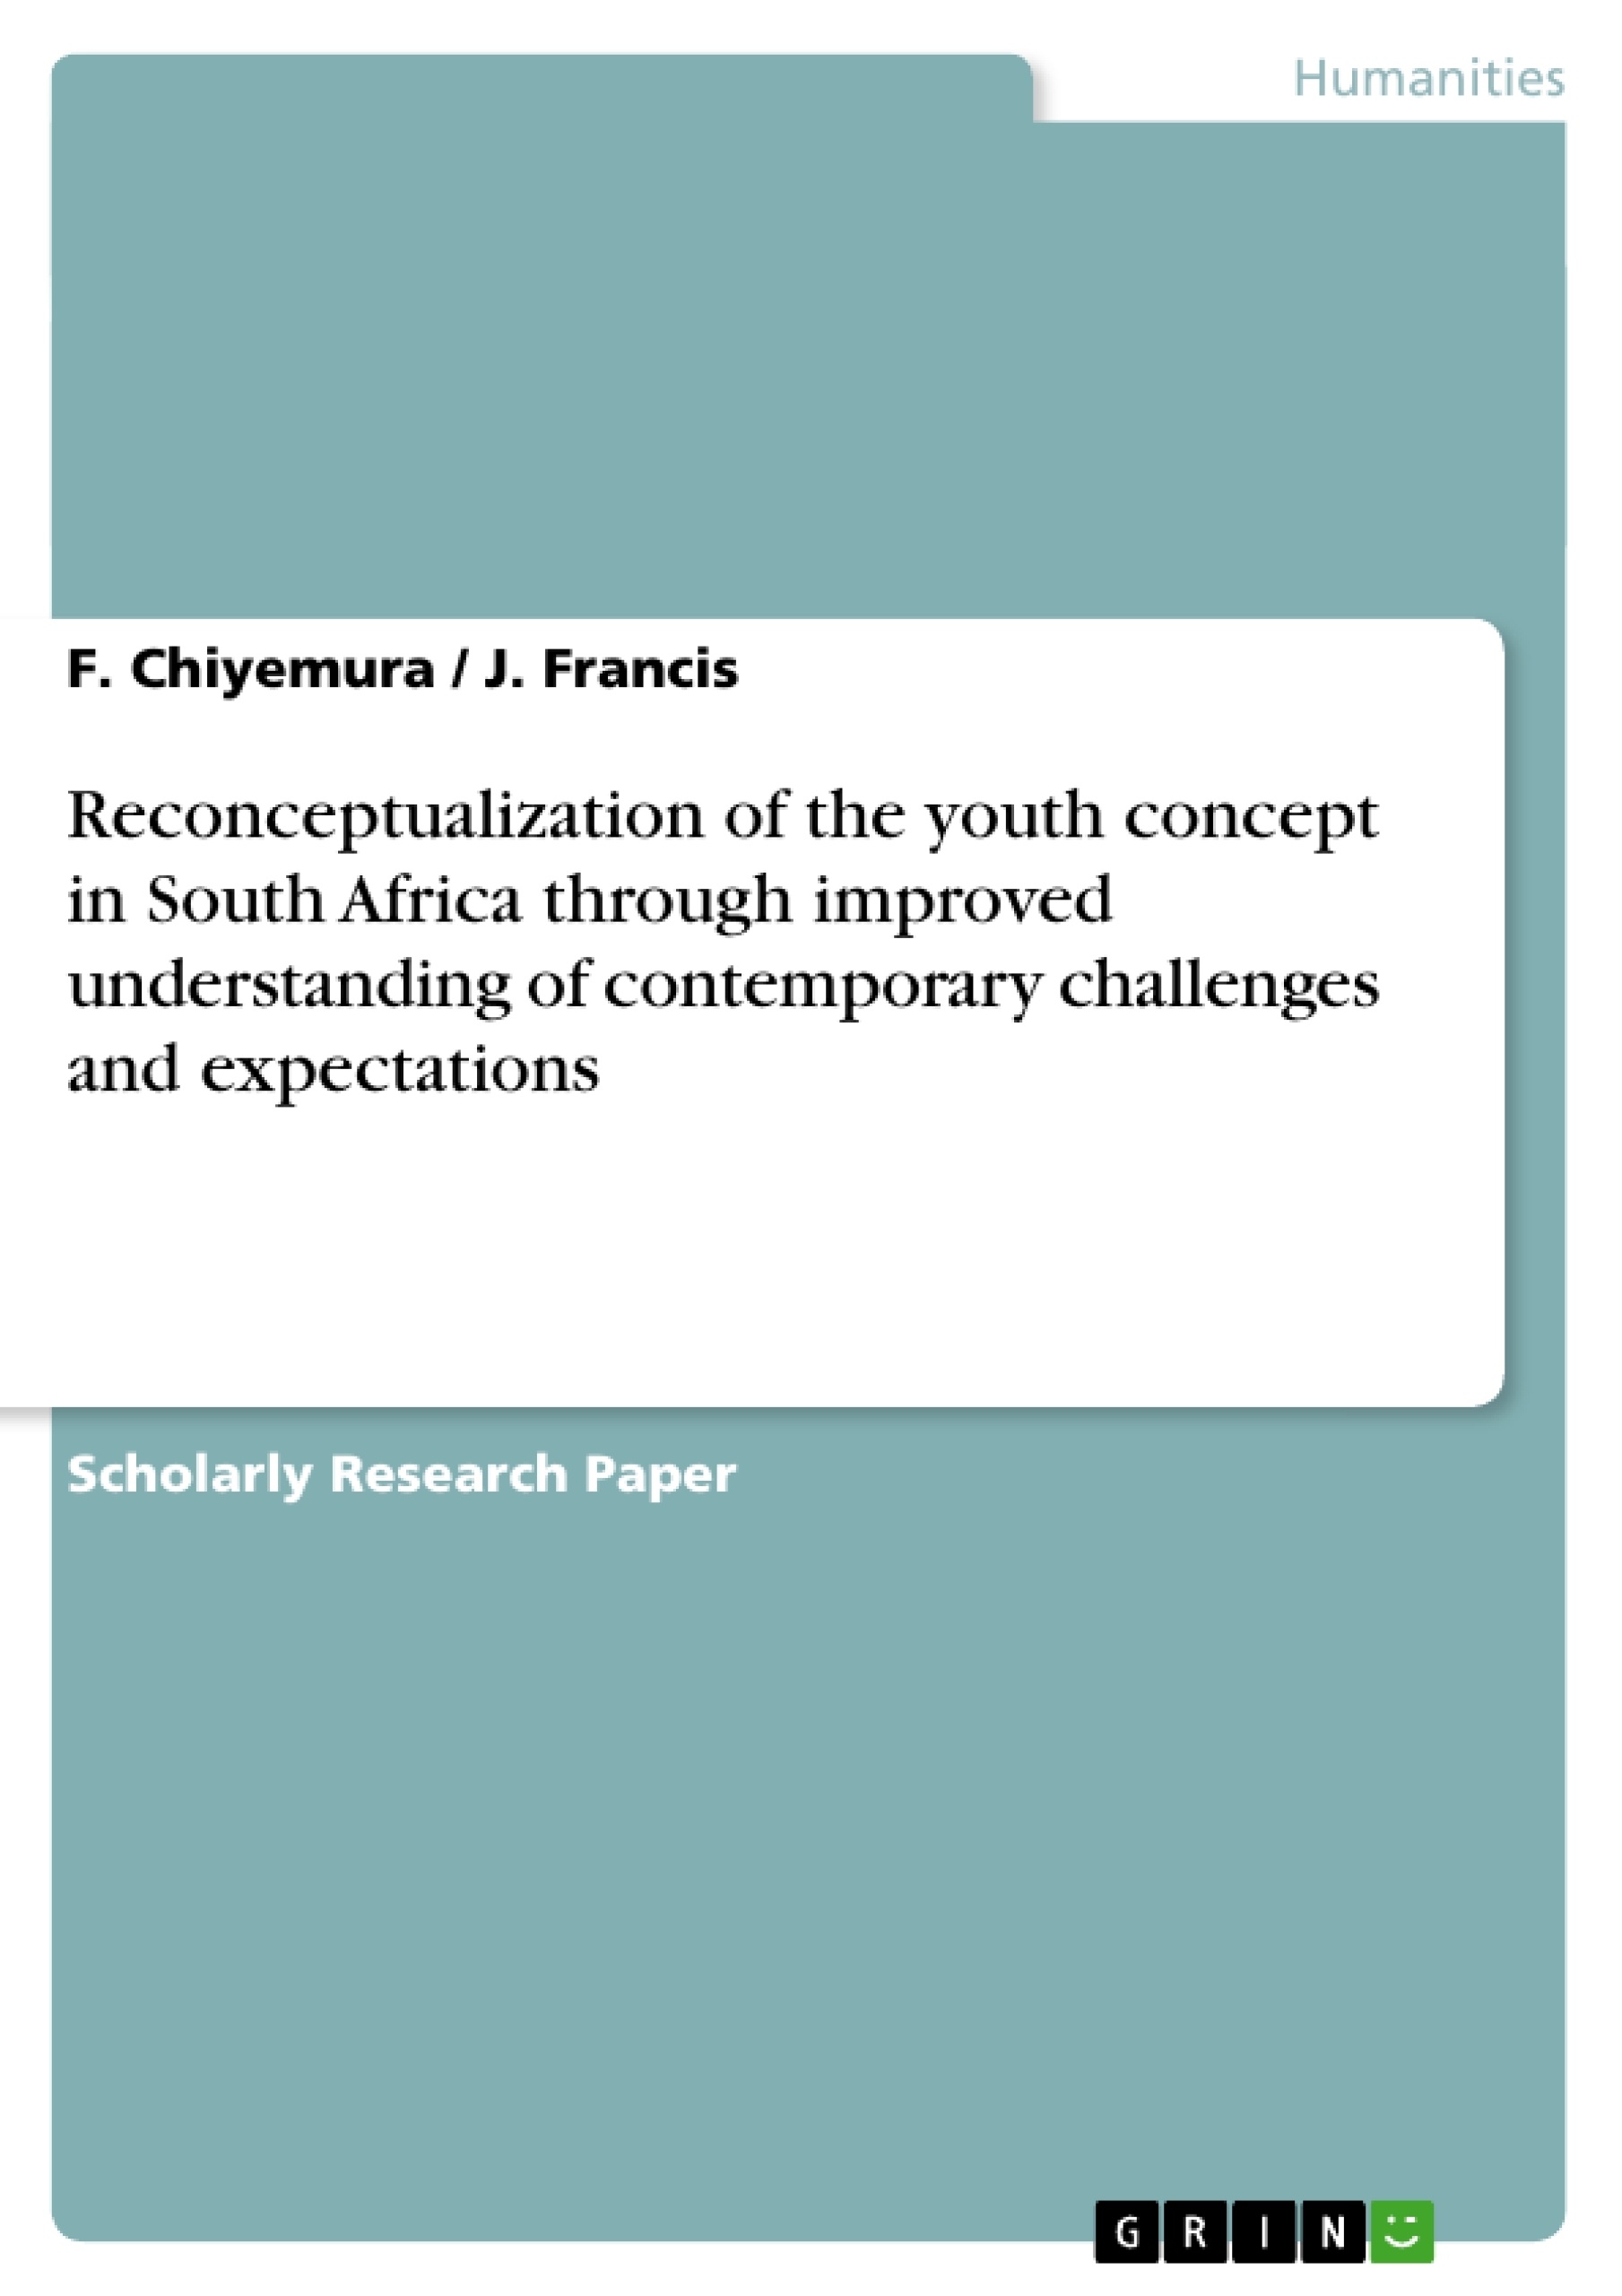 Title: Reconceptualization of the youth concept in South Africa through improved understanding of contemporary challenges and expectations